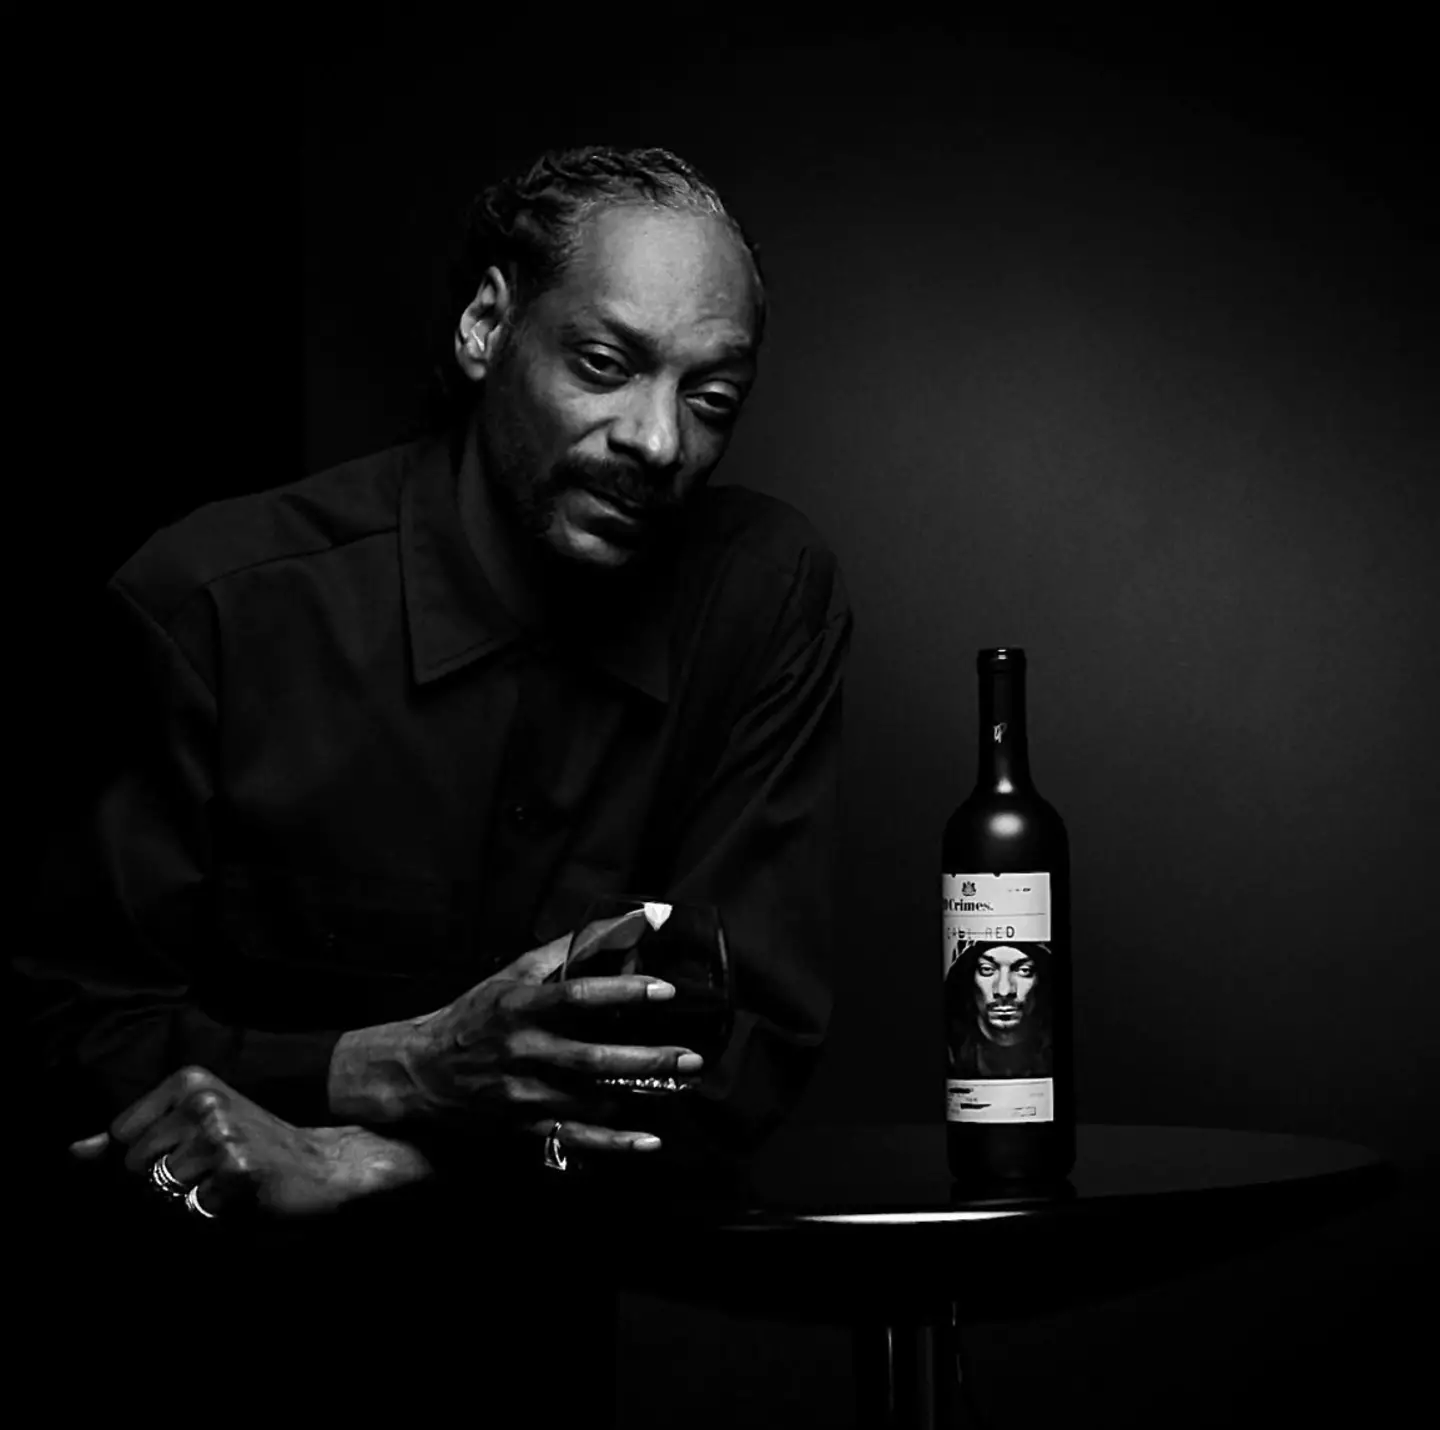 Snoop Dogg owns his own wine brand, Cali by Snoop.